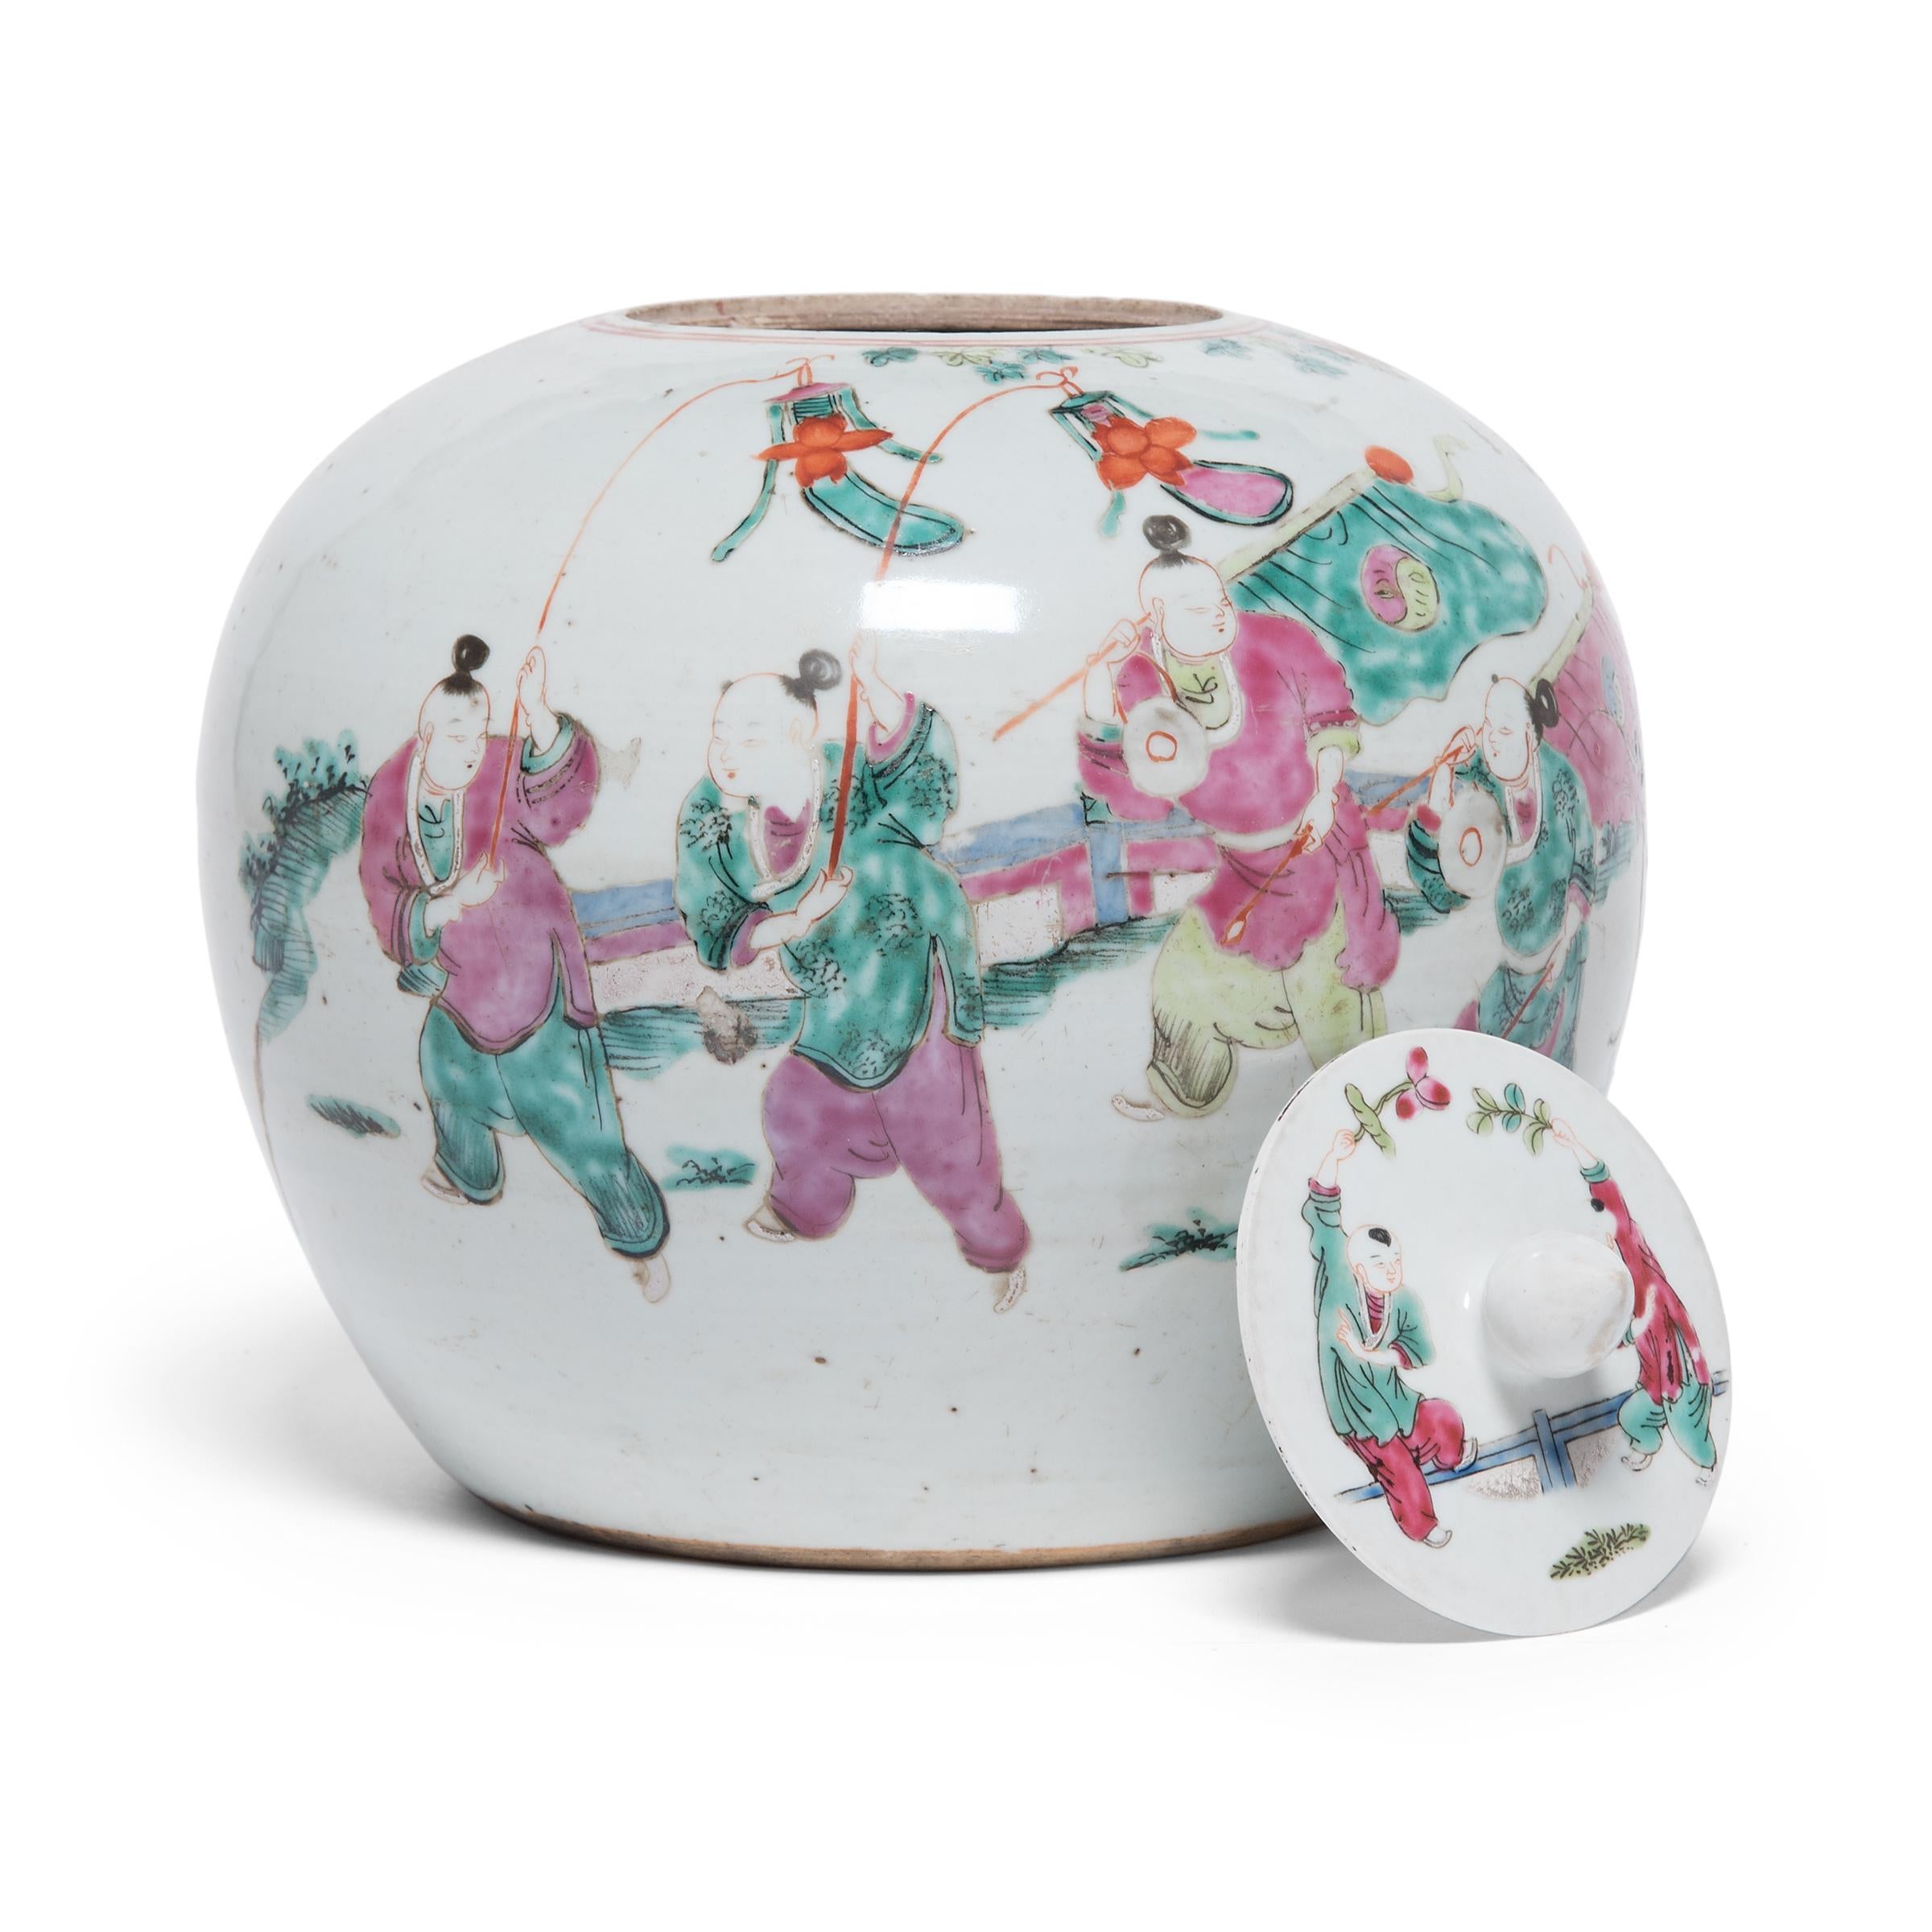 20th Century Chinese Famille Rose Ginger Jar with Mythical Qilin, C. 1900